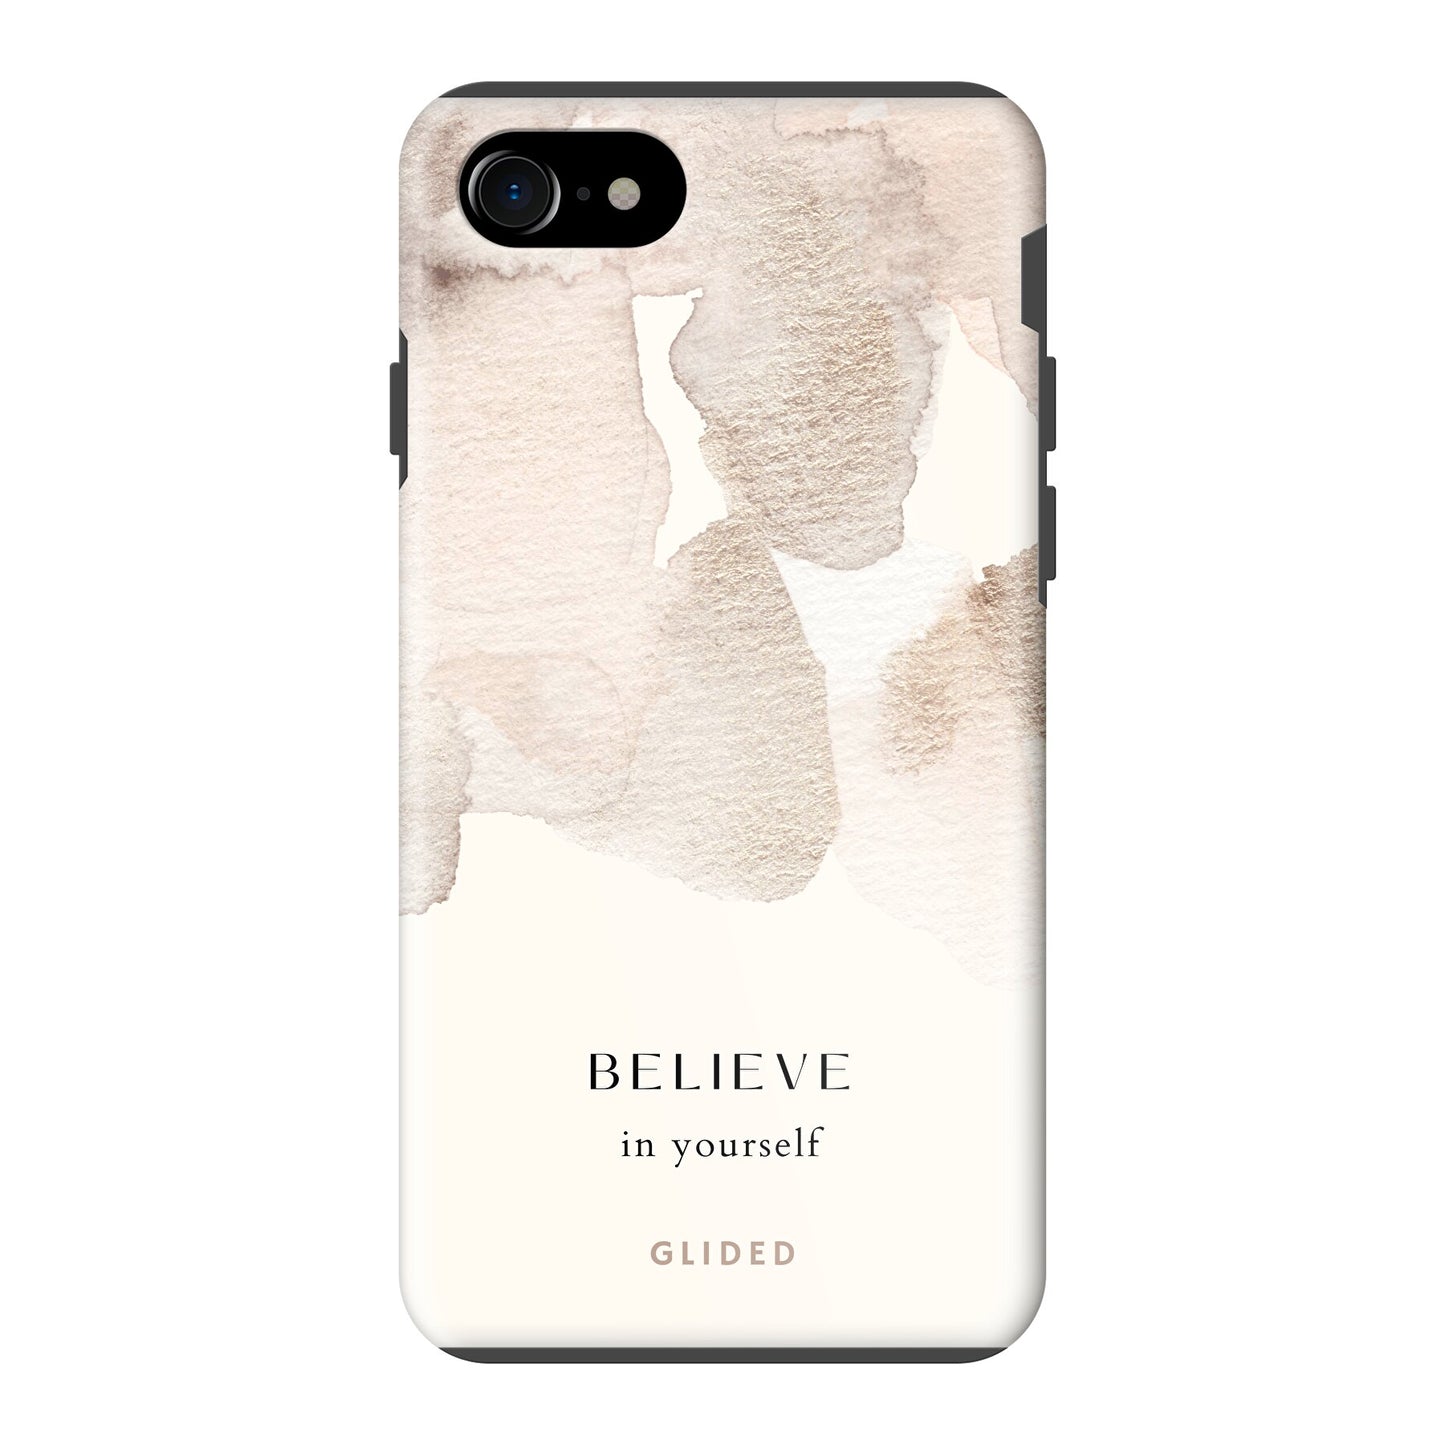 Believe in yourself - iPhone 8 Handyhülle Tough case